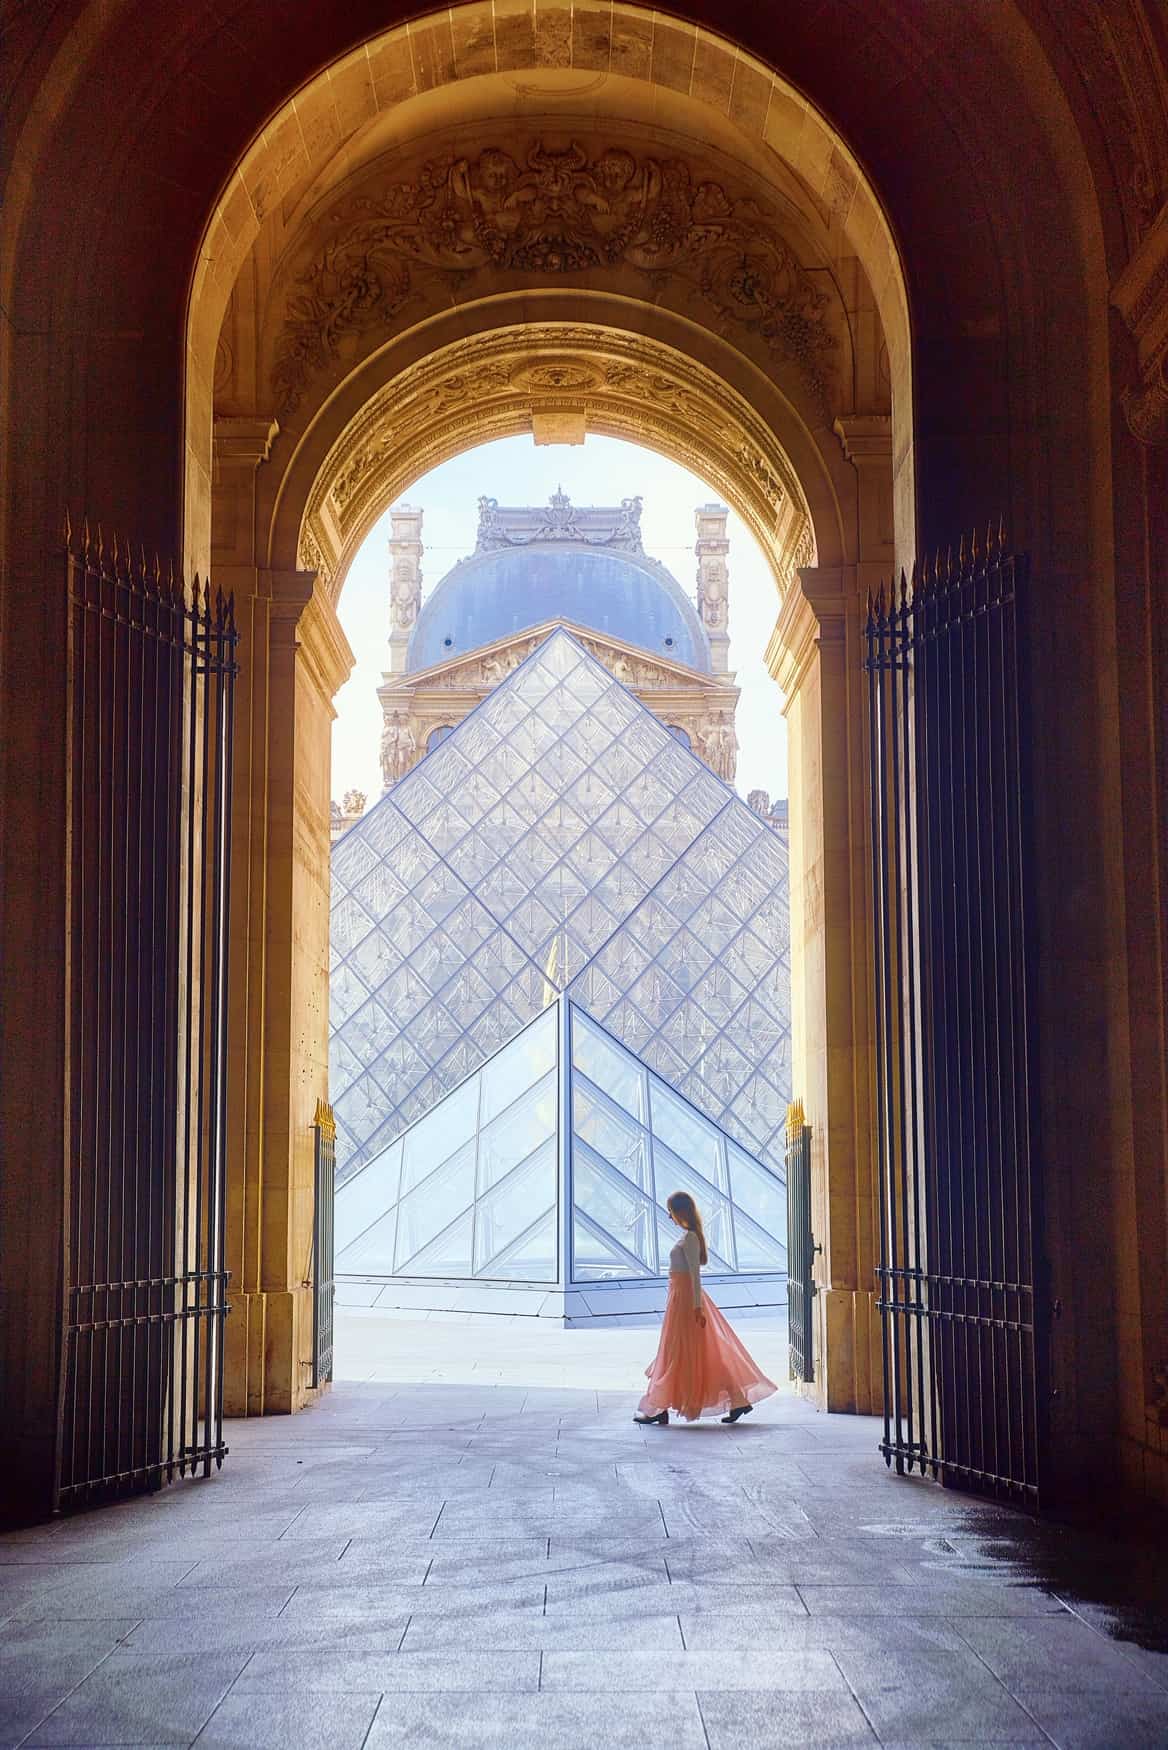 The Louvre Pyramids make the perfect backdrop for sunrise in Paris